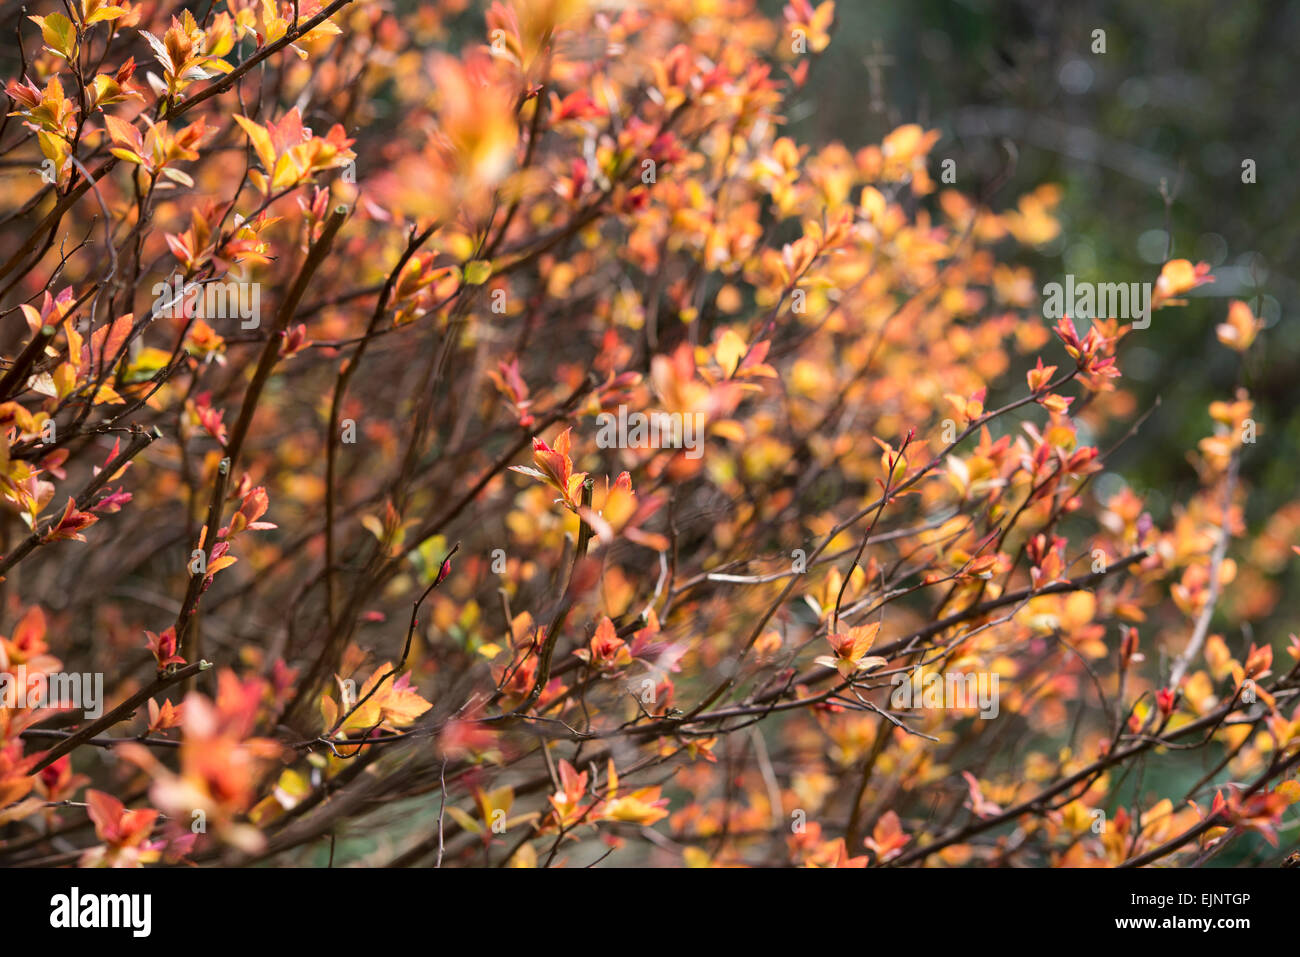 Bright new shoots of a Spirea 'Goldflame' shrub in spring sunlight. Stock Photo